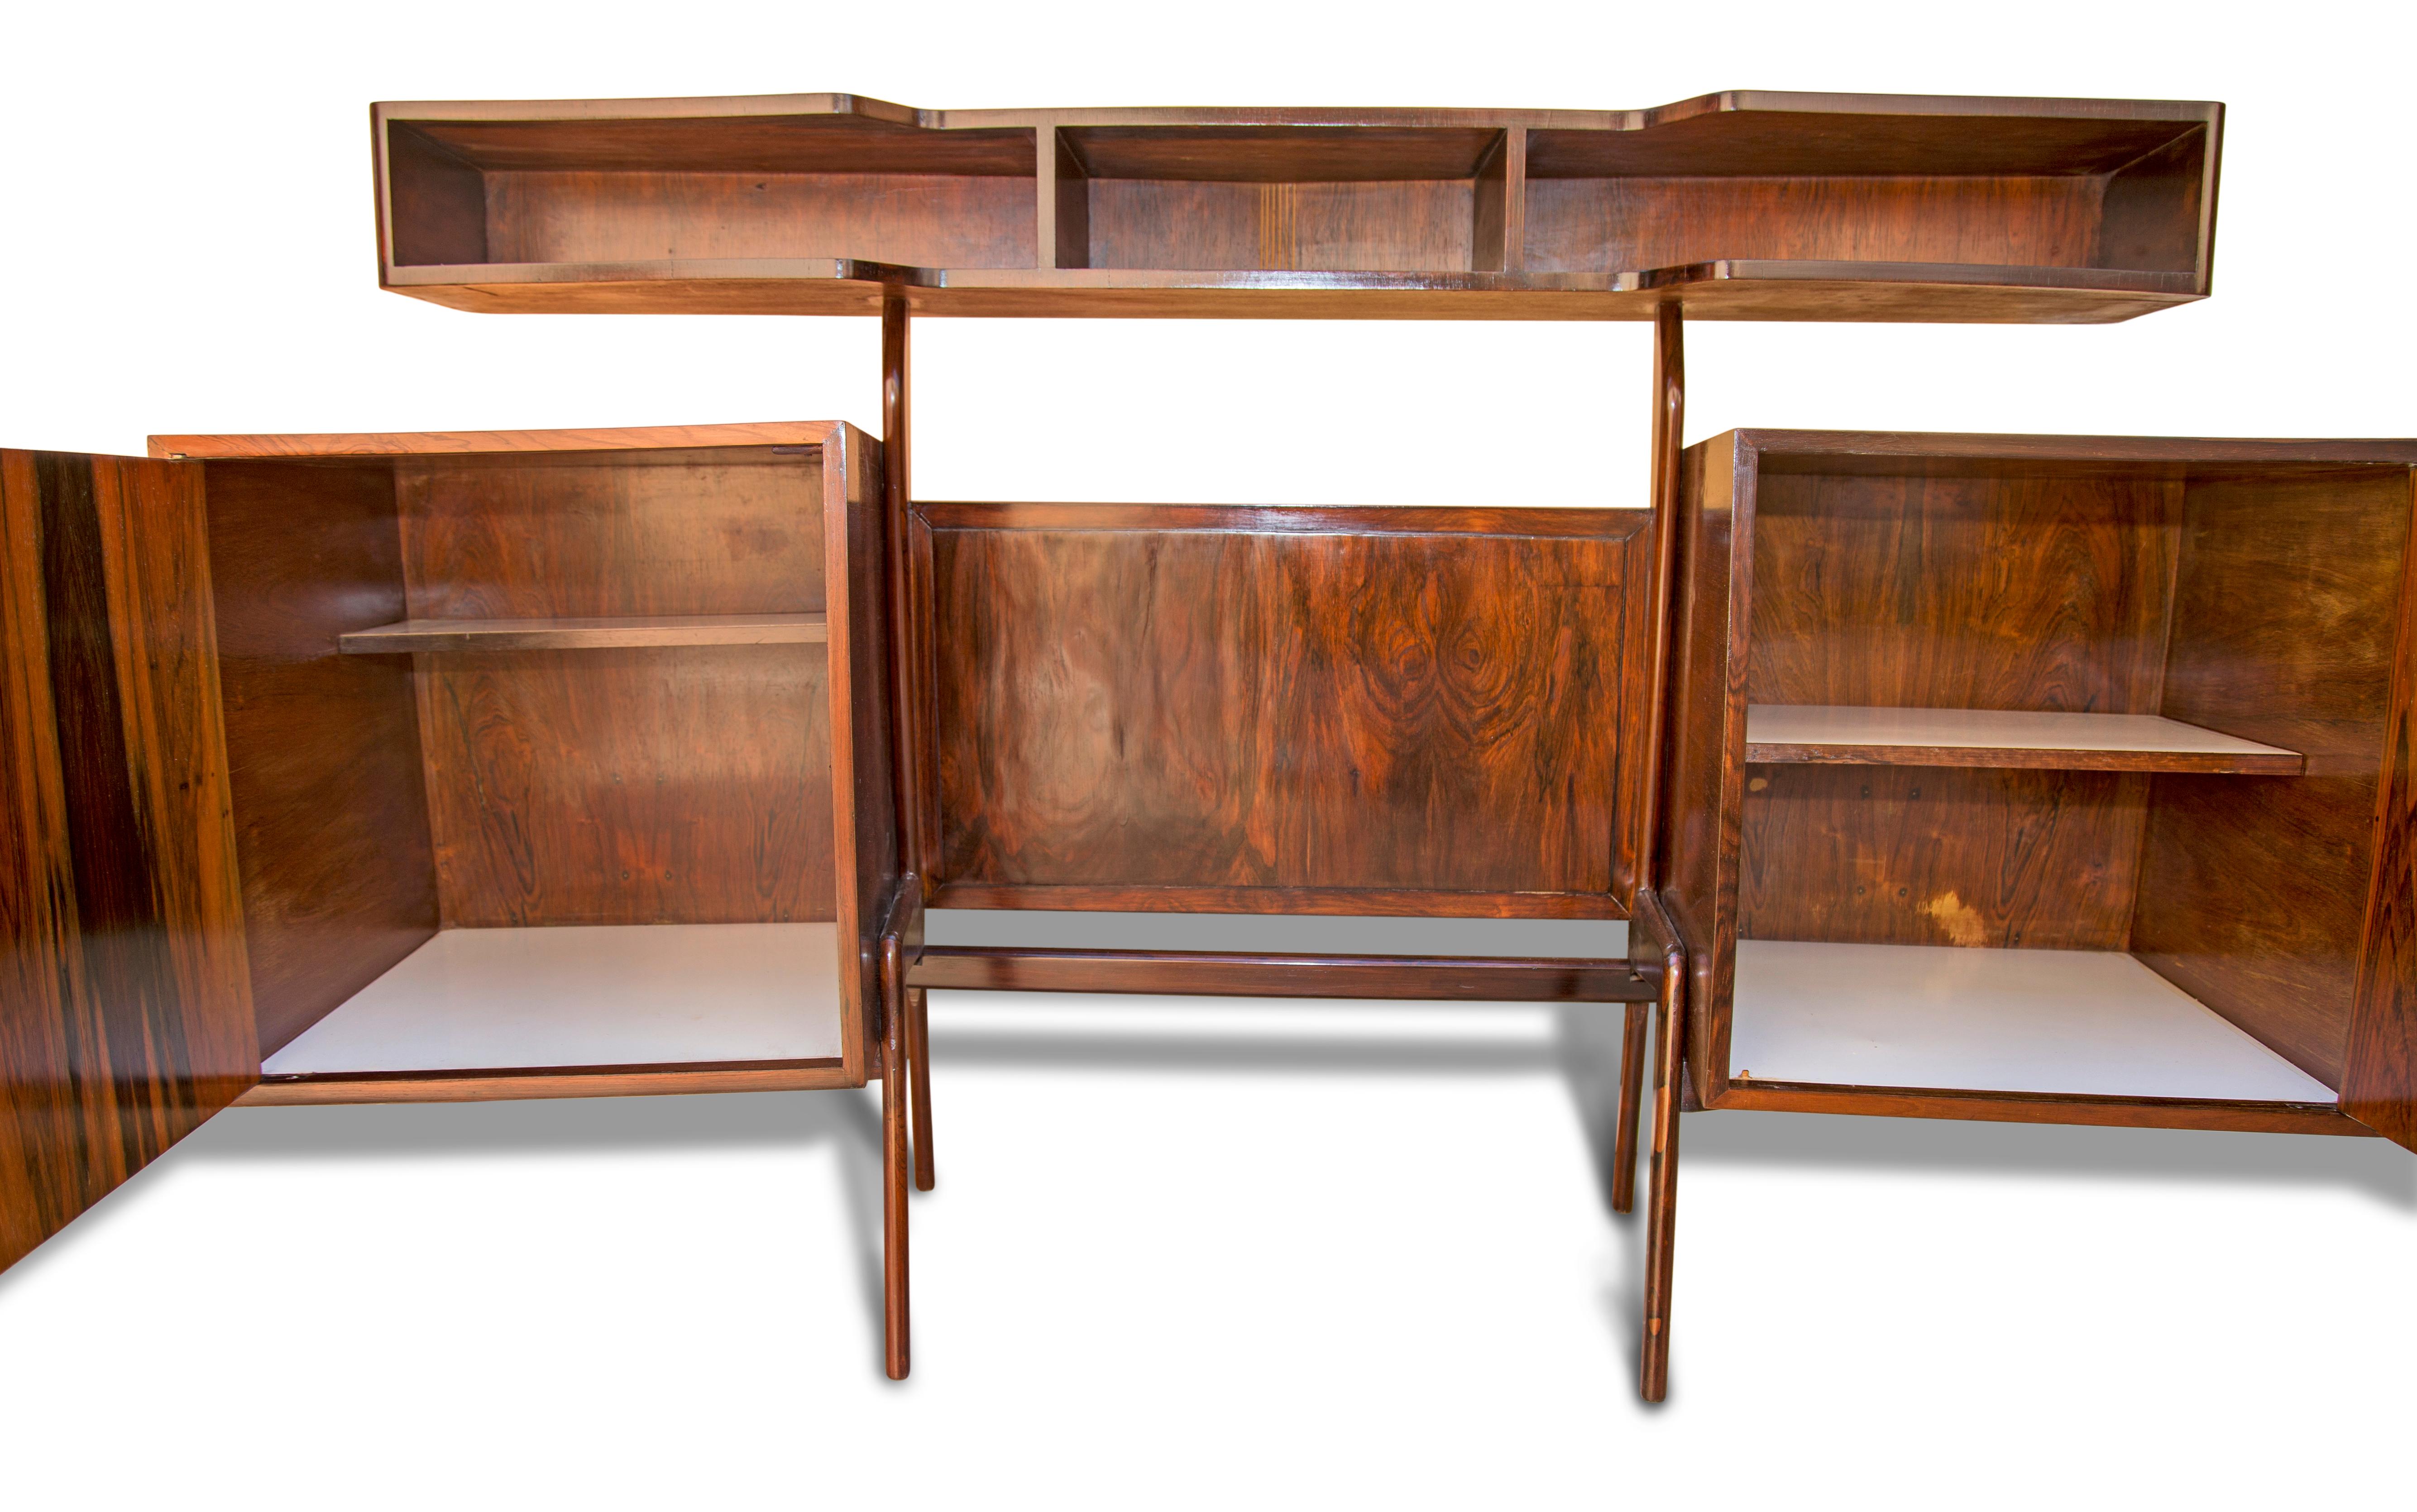 Brazilian Modern Hand Painted Bar in Hardwood by G. Scapinelli, 1950s, Brazil For Sale 2